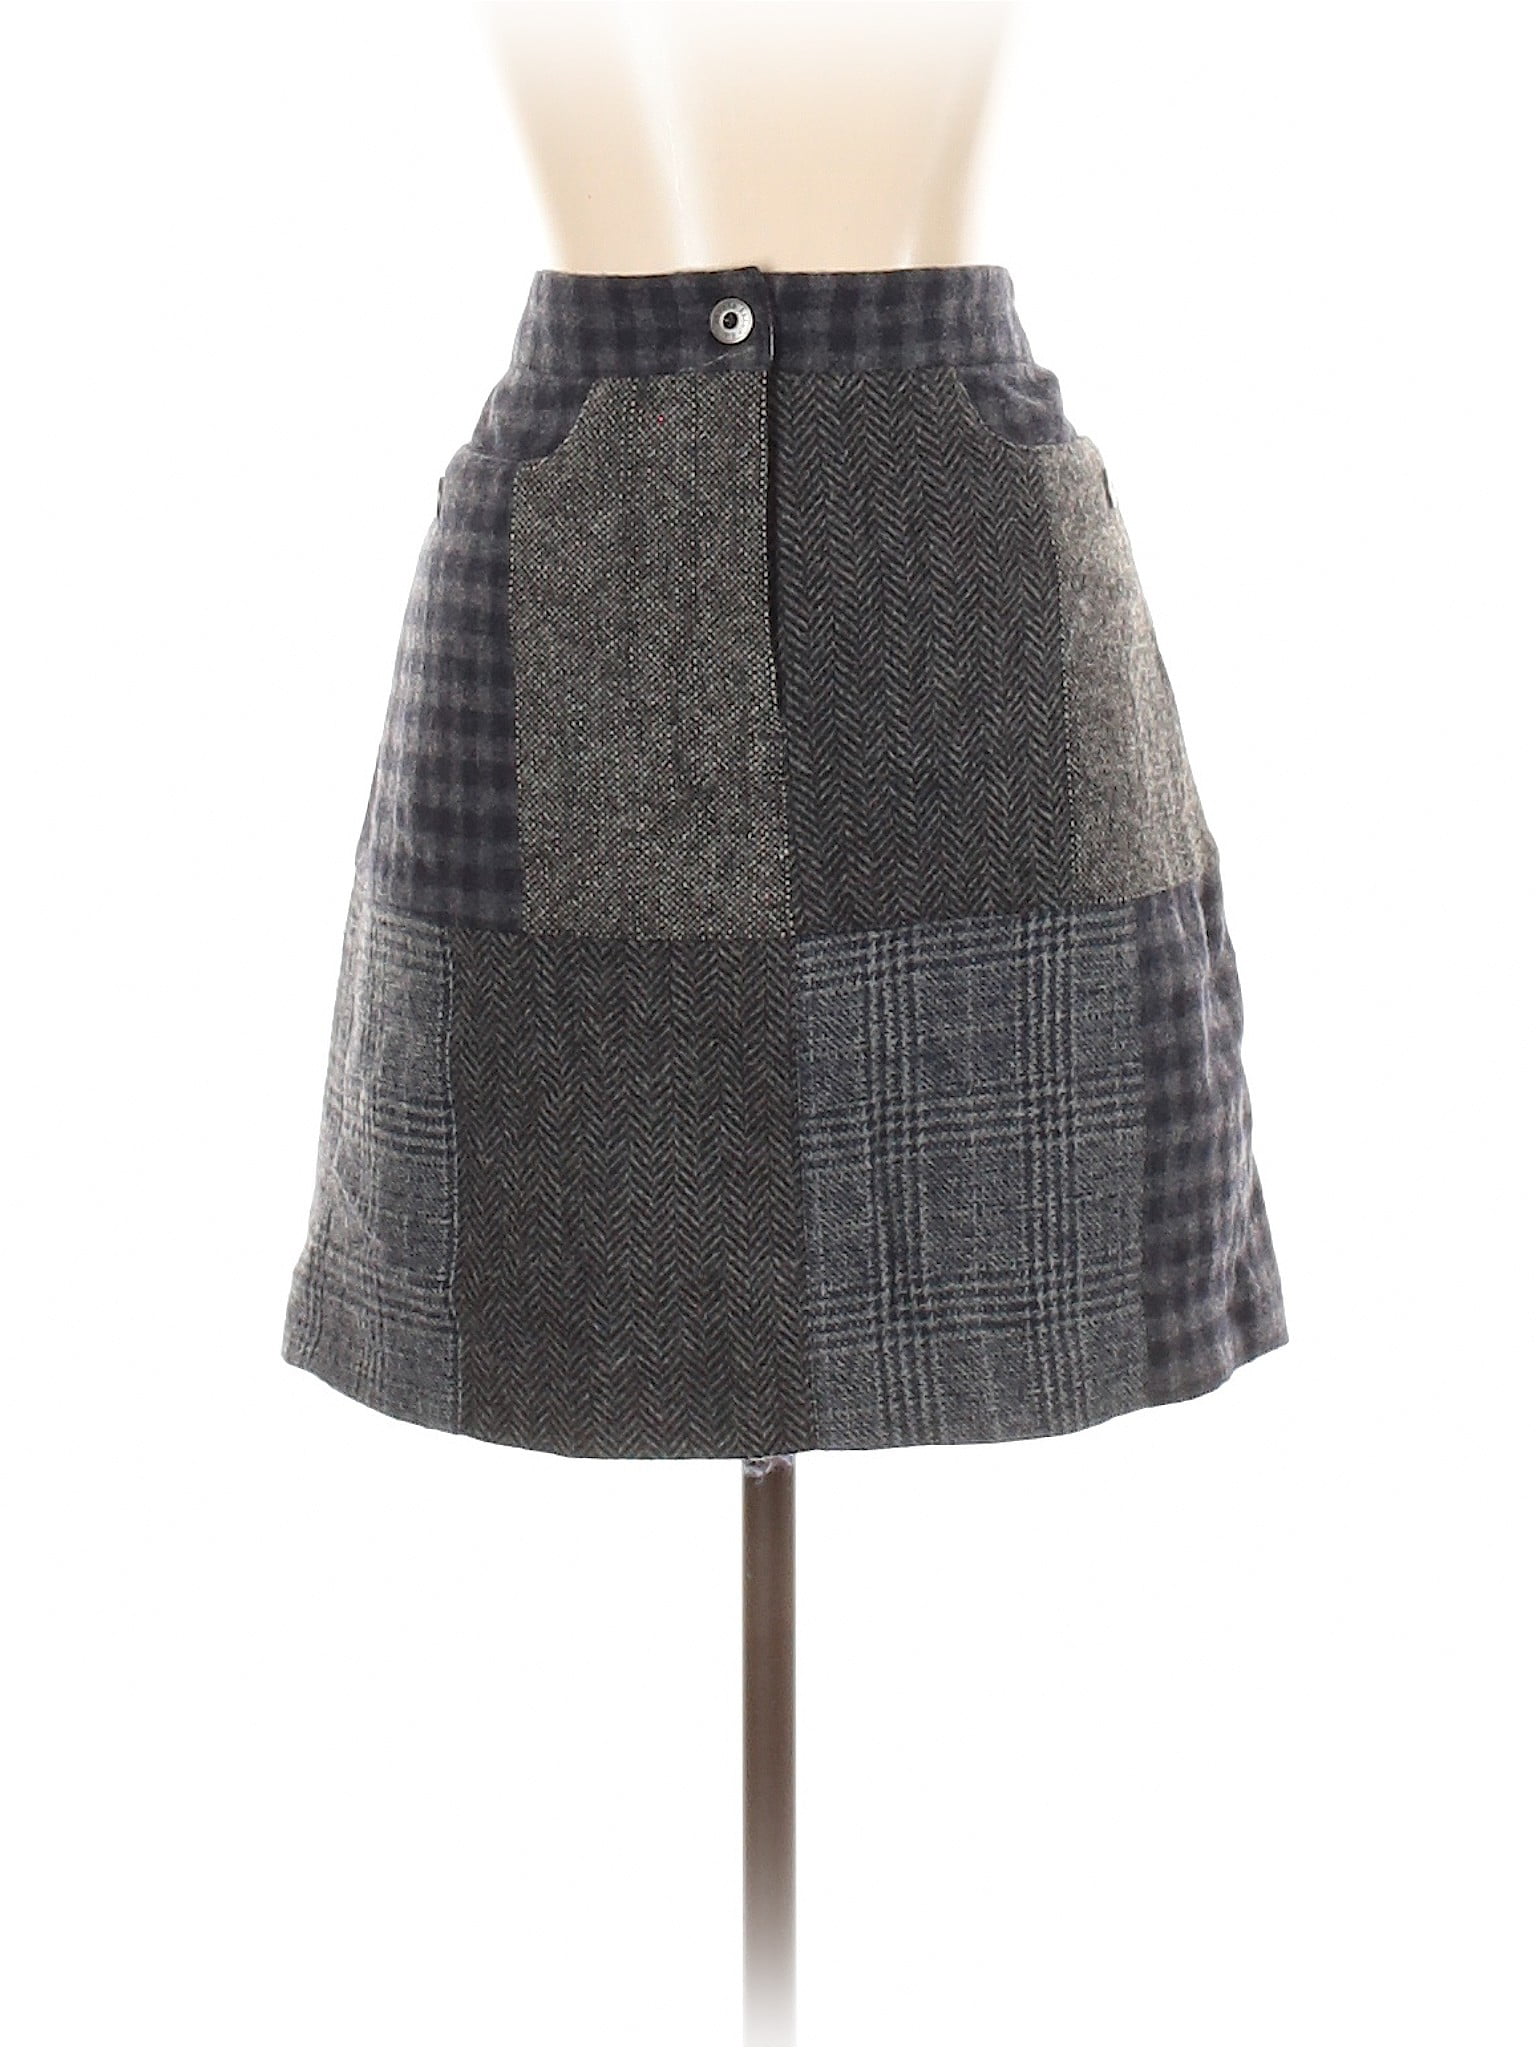 Brooks Brothers - Pre-Owned Brooks Brothers Women's Size 4 Wool Skirt ...